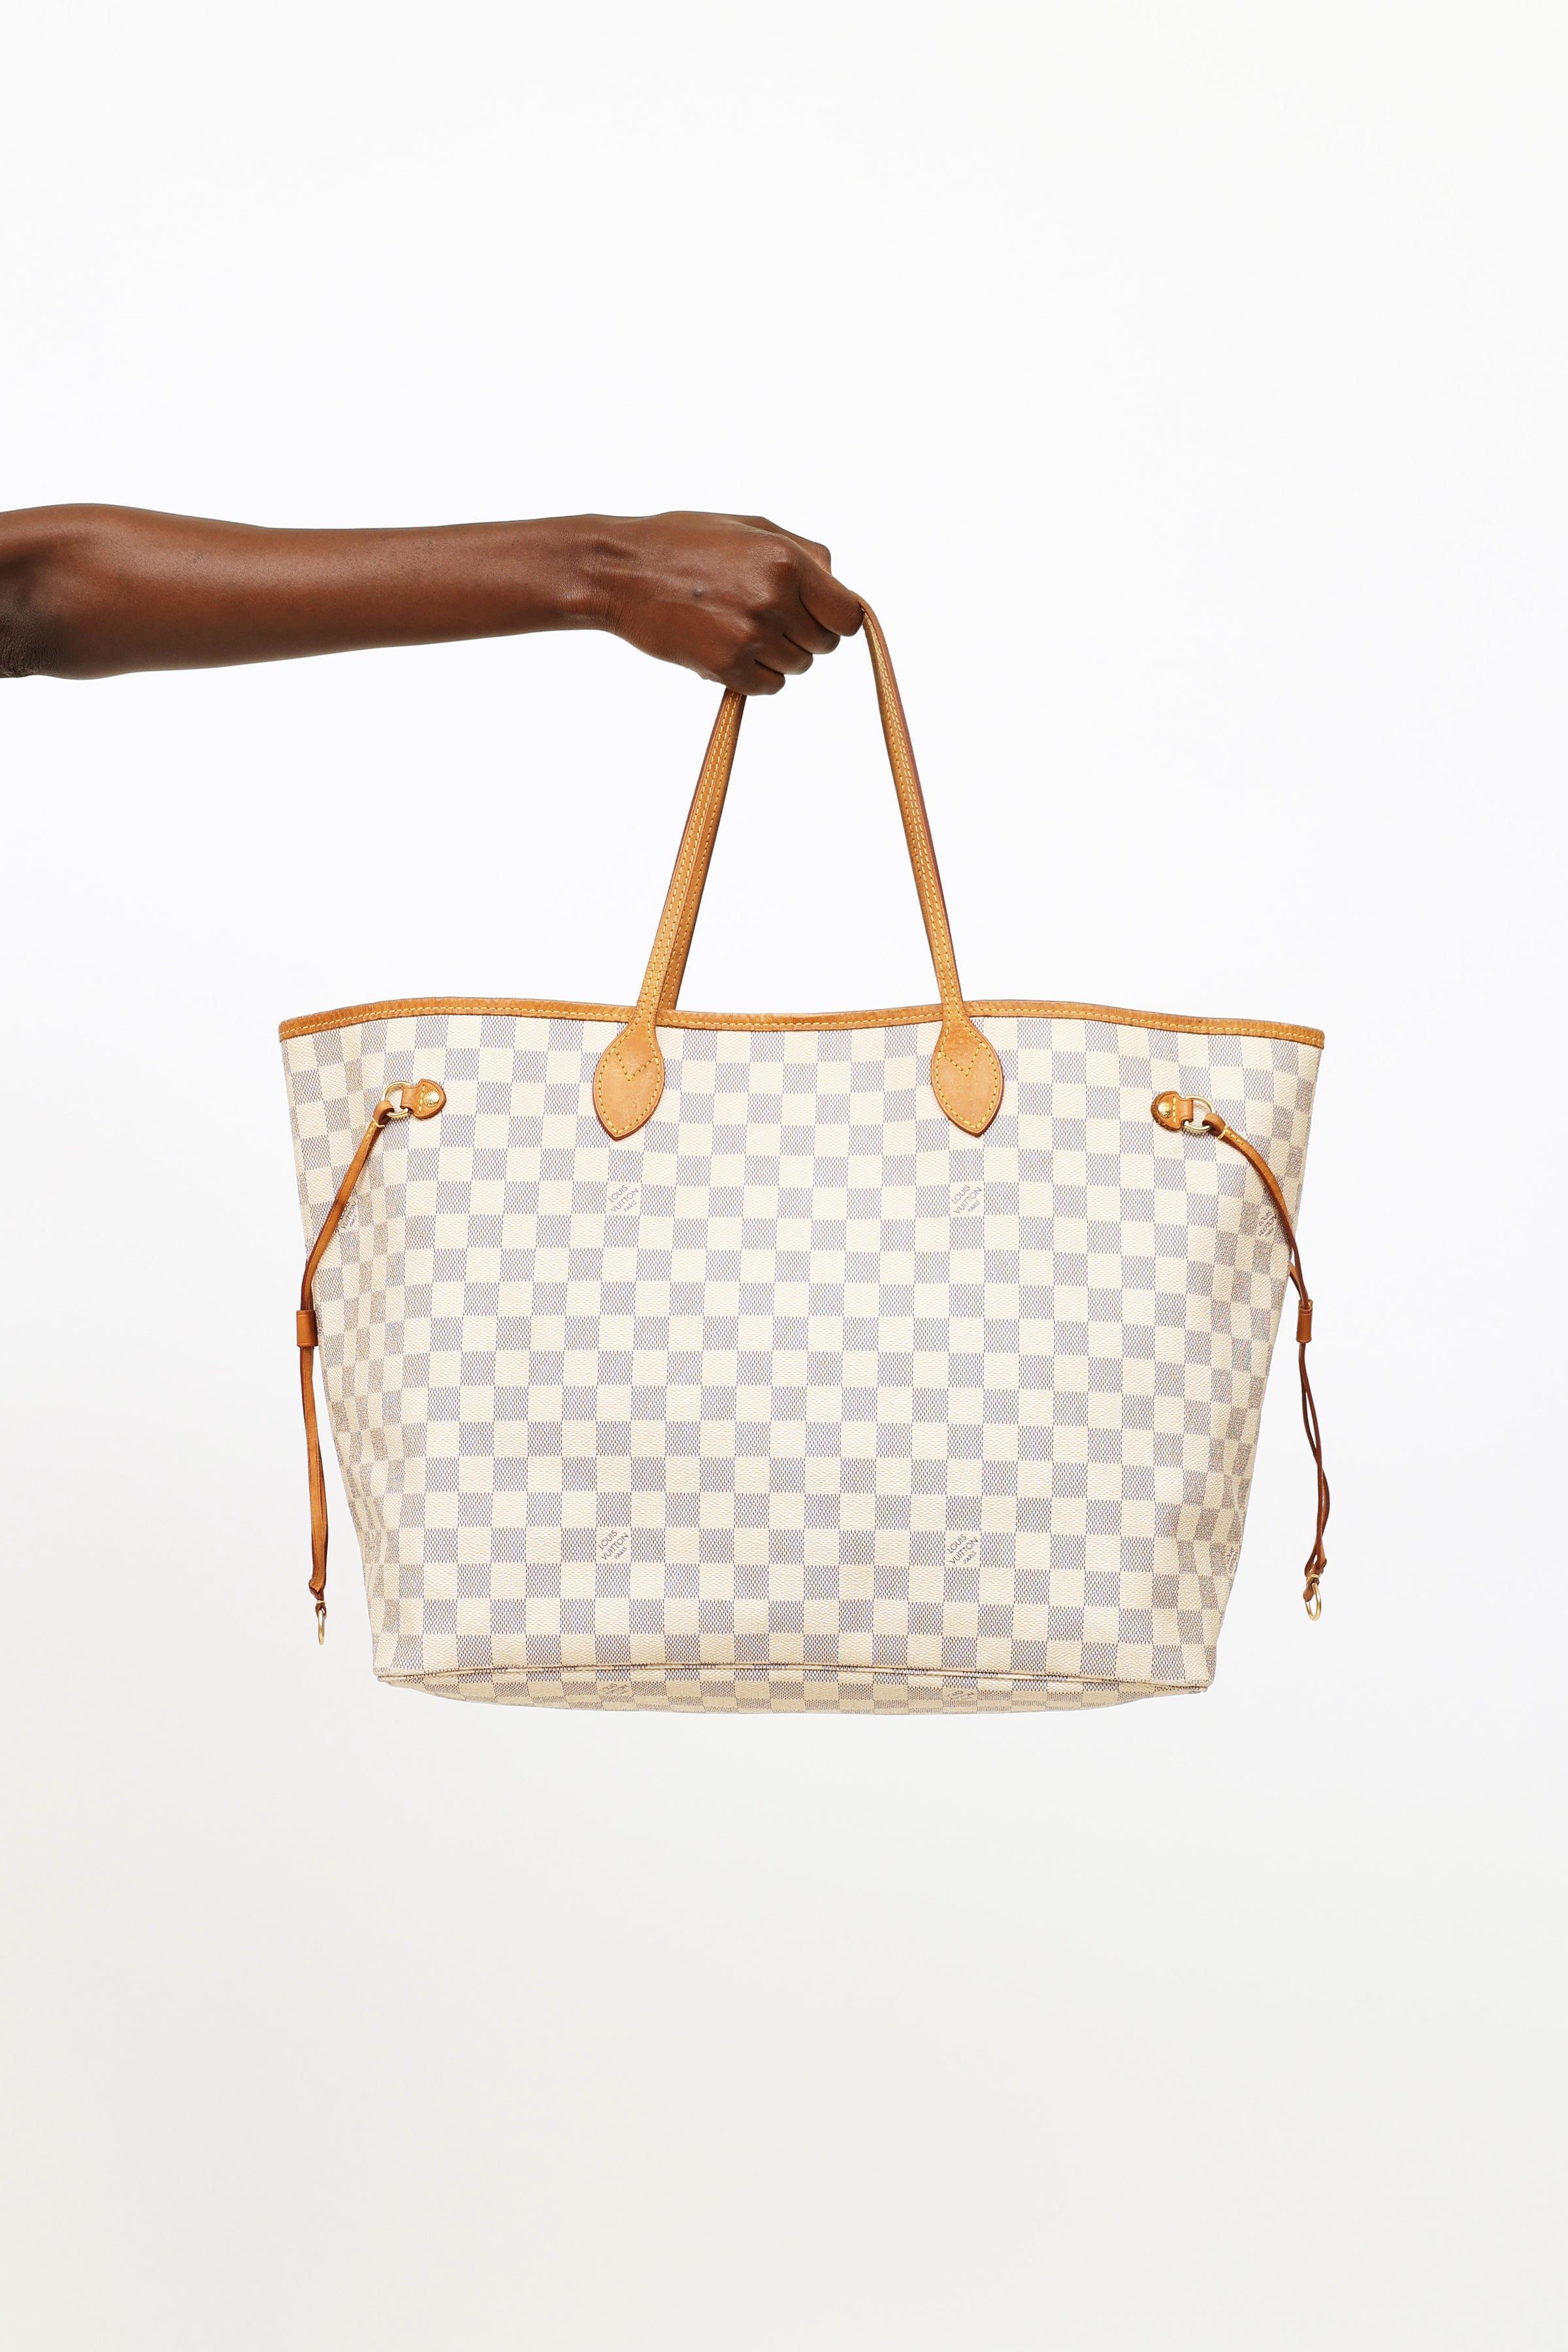 Louis Vuitton Neverfull Tote MM Cream Canvas for sale online